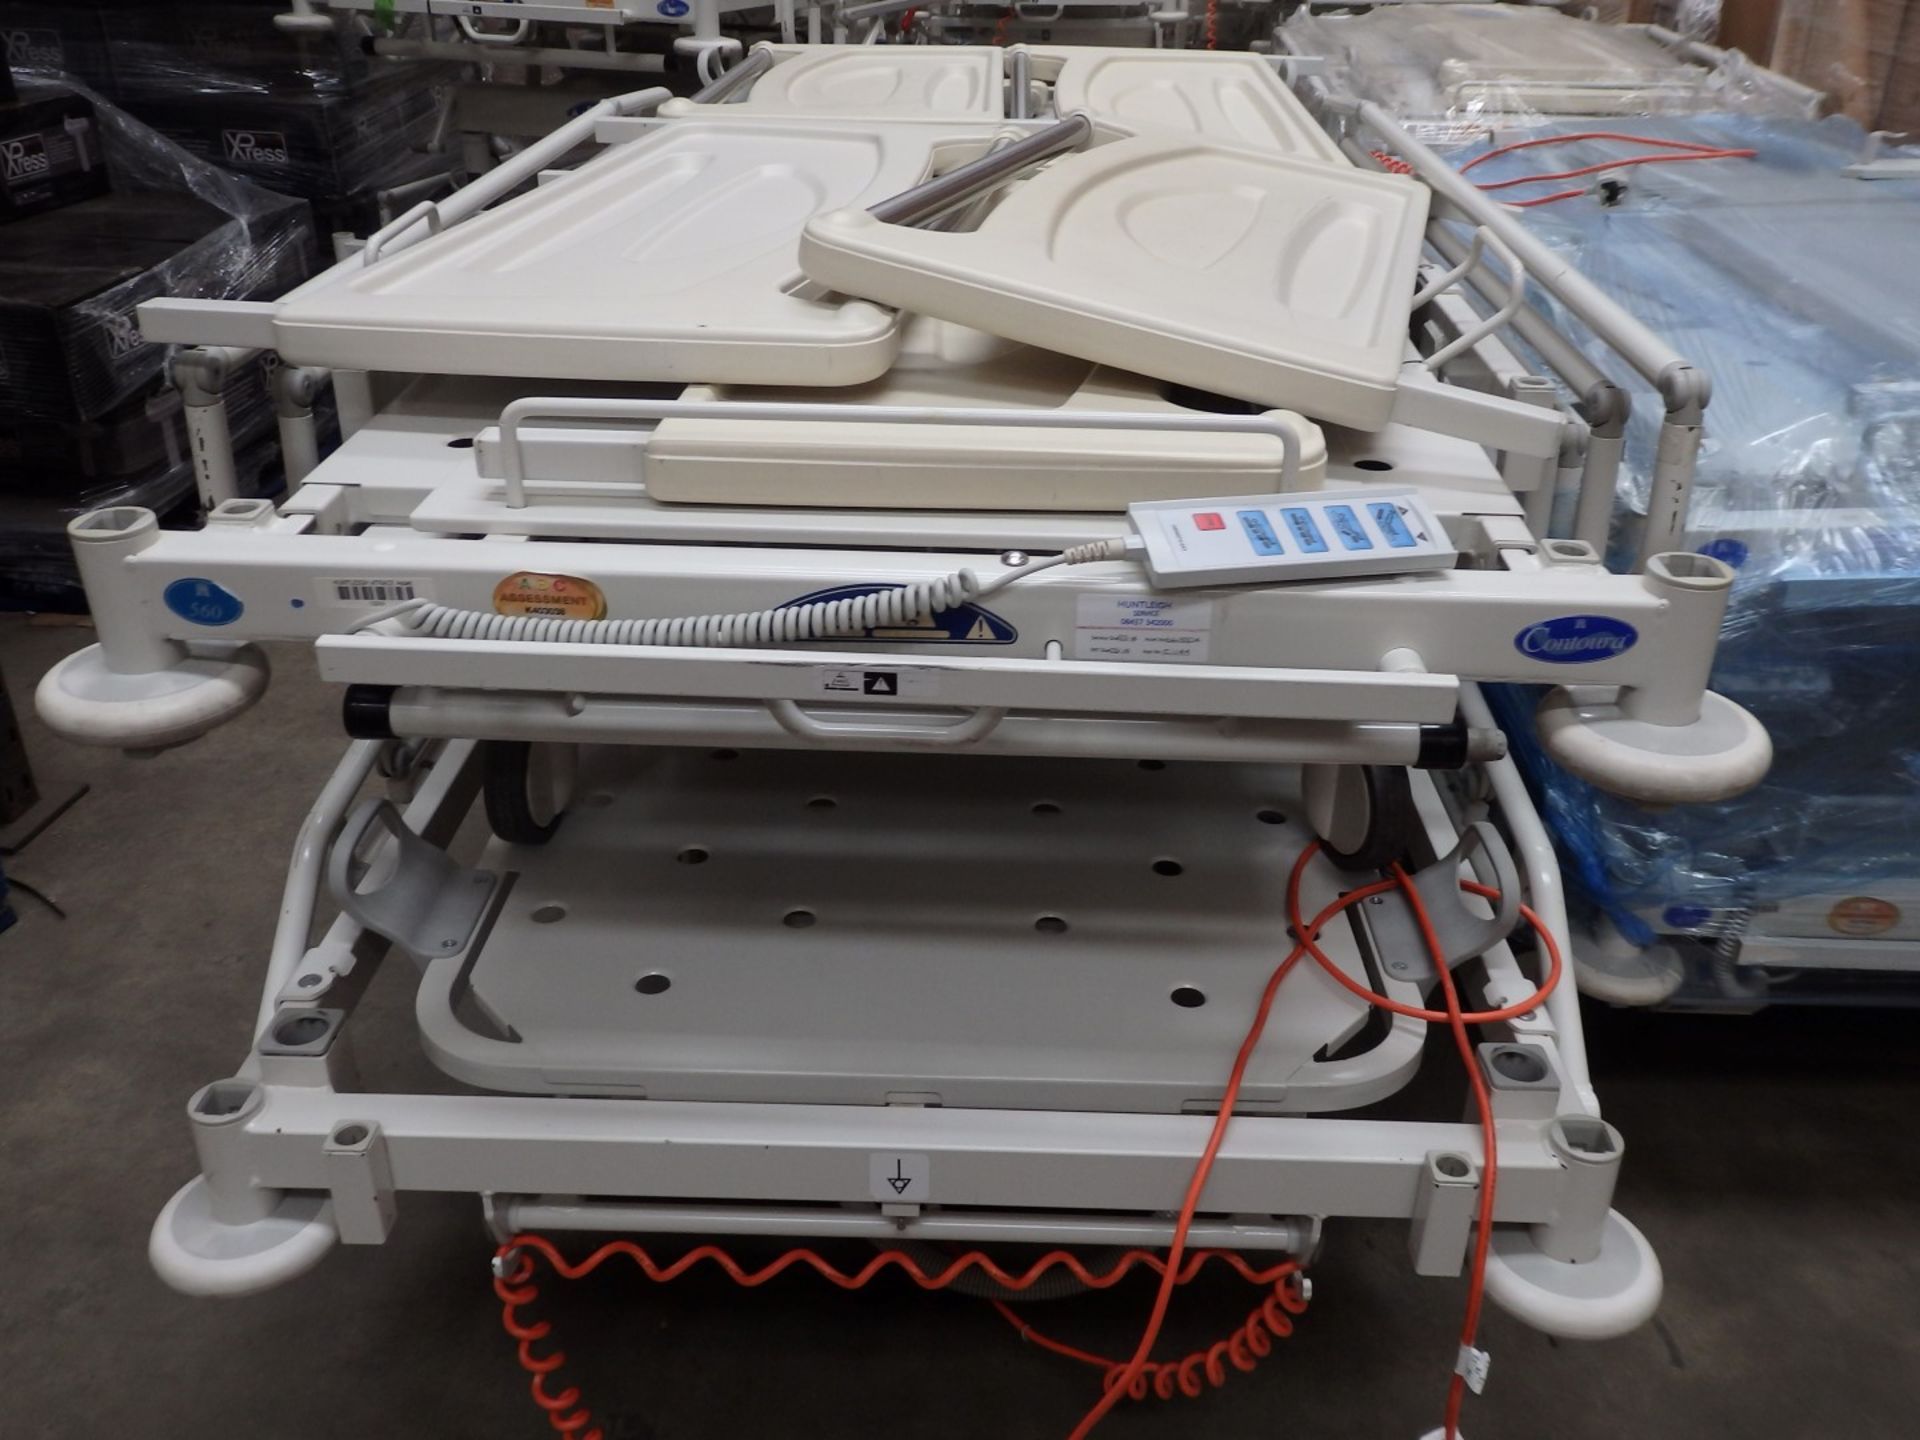 1 x Contoura 560 Huntleigh Electric Hospital Bed - Adult Size - With Side Rails - Four Section - Image 3 of 10